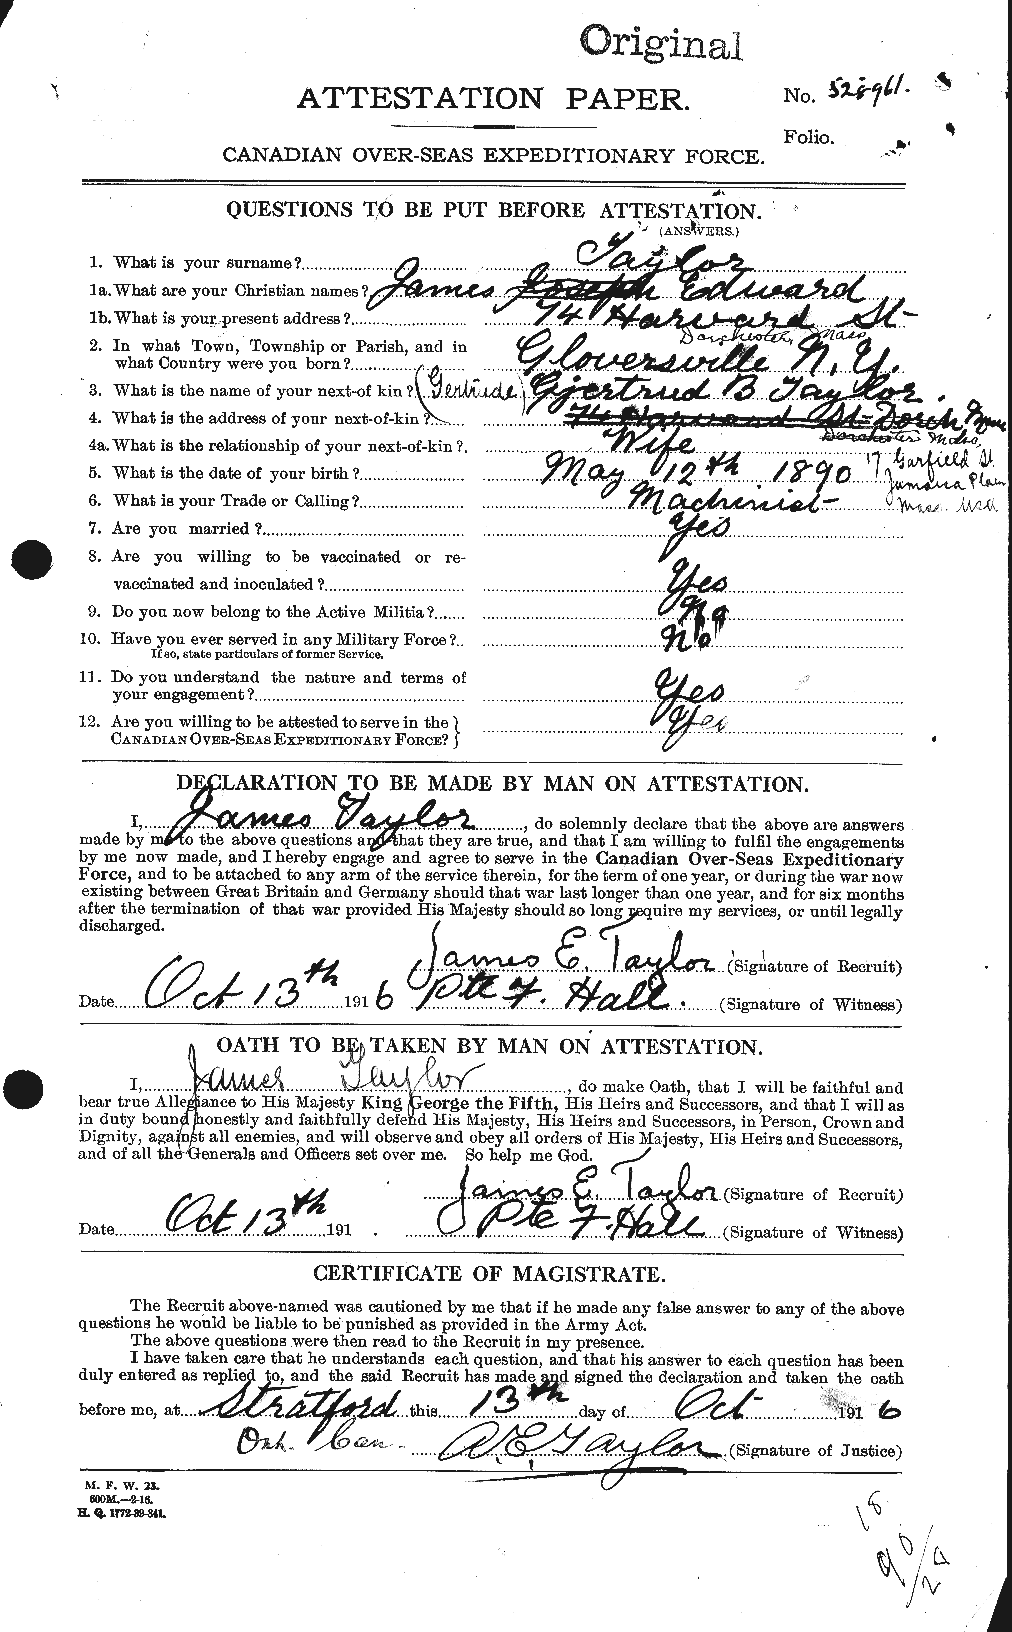 Personnel Records of the First World War - CEF 626914a